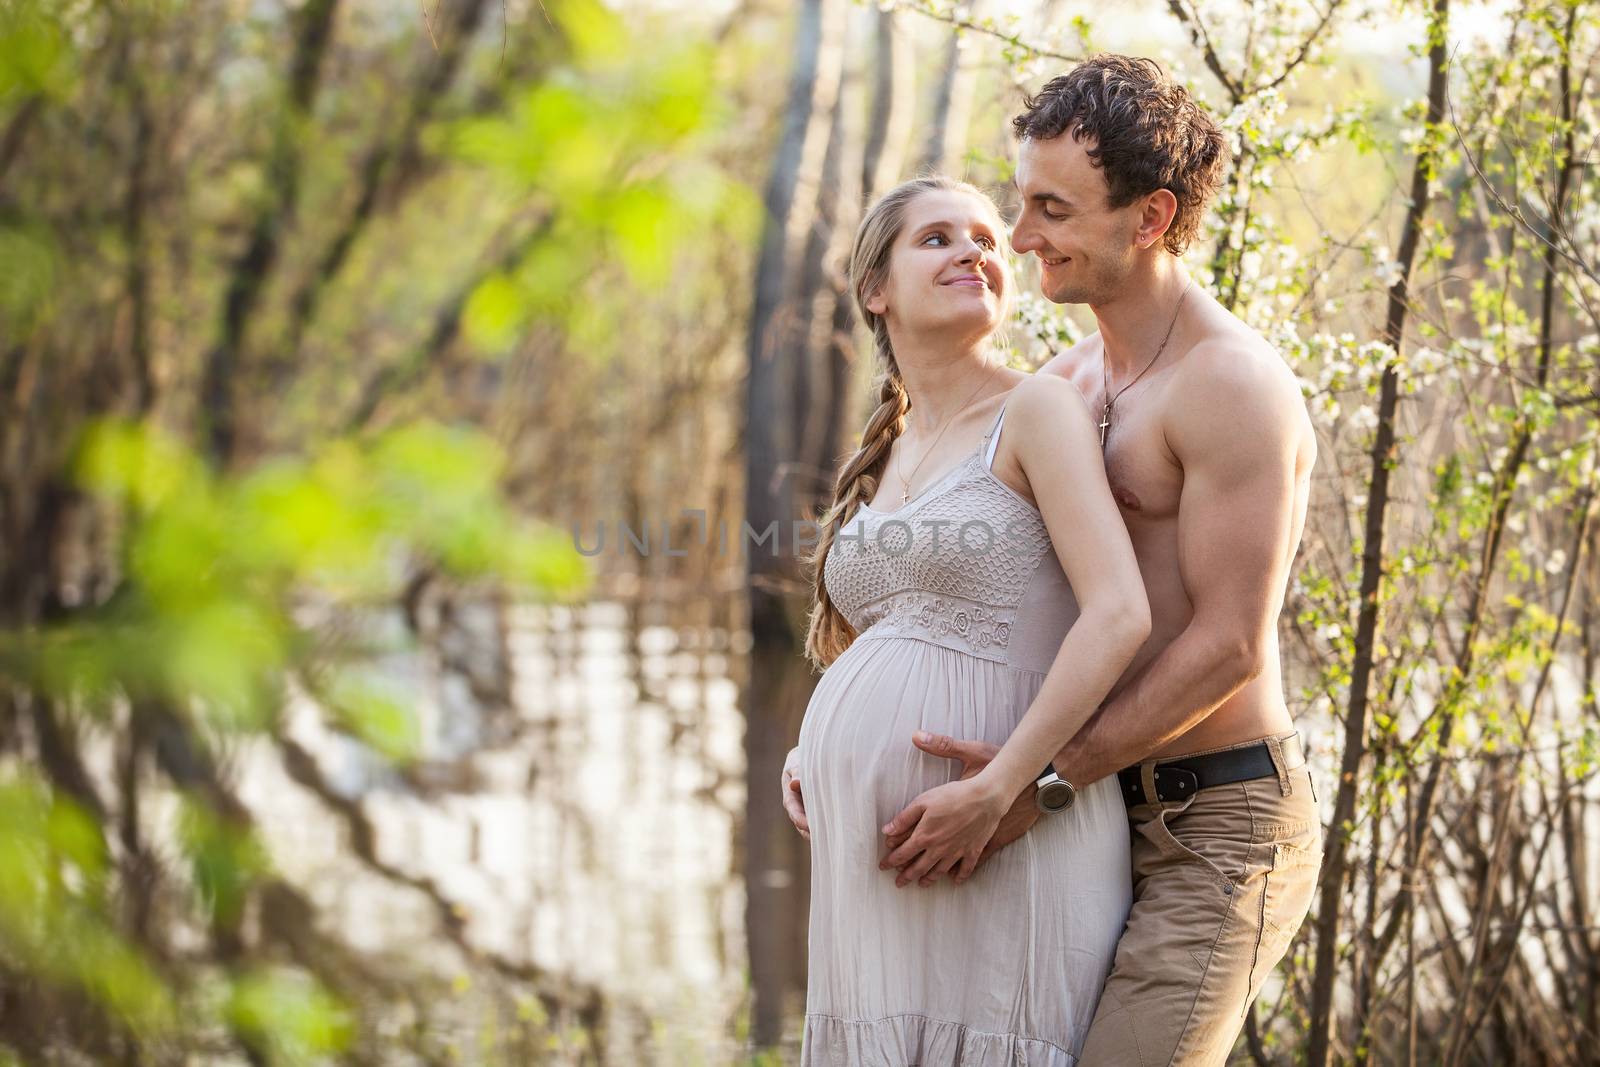 Young pregnant couple at the river in spring